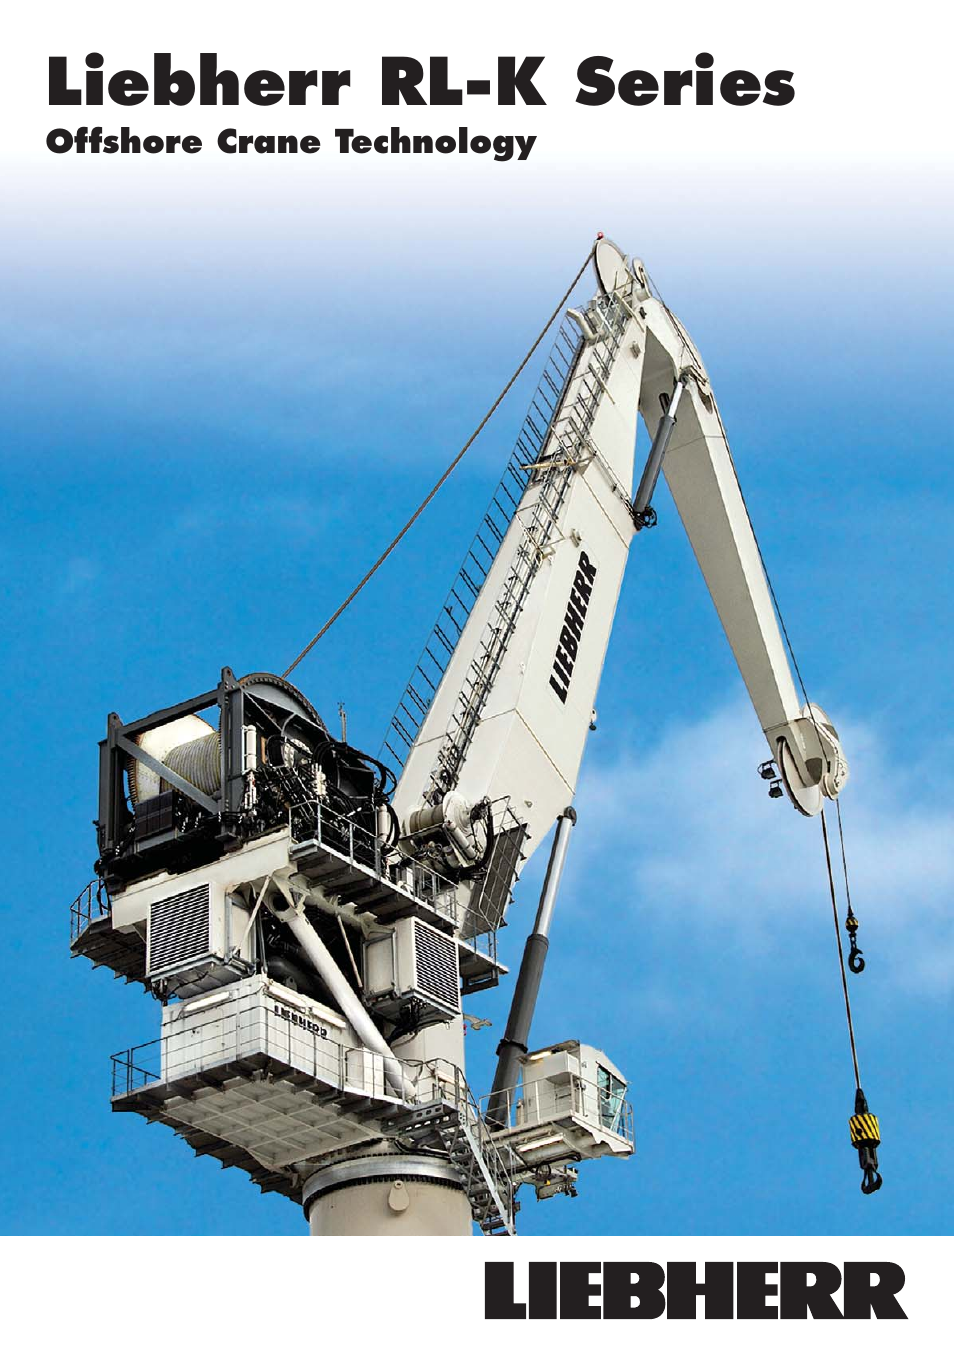 Liebherr RL-K 7500 User Manual | 2 pages | Also for: RL-K 4200, Subsea